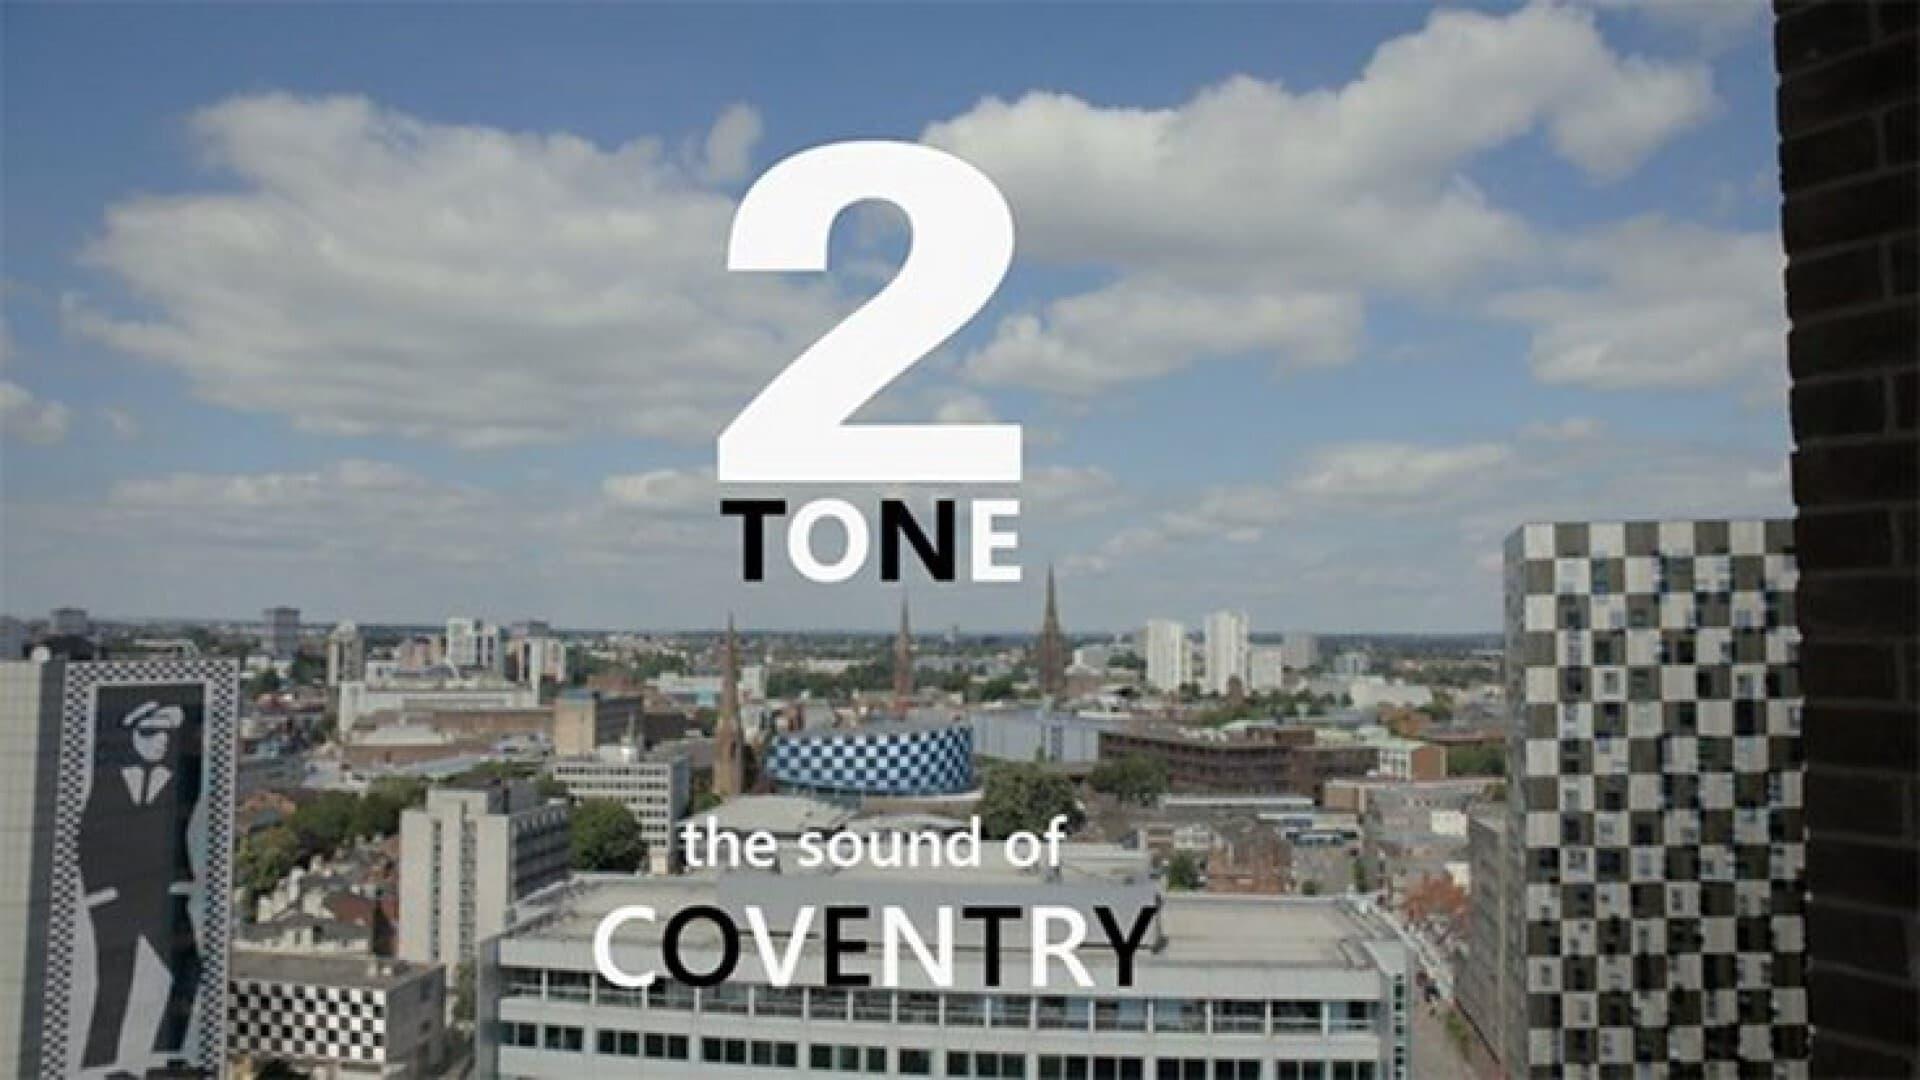 2 Tone: The Sound of Coventry backdrop